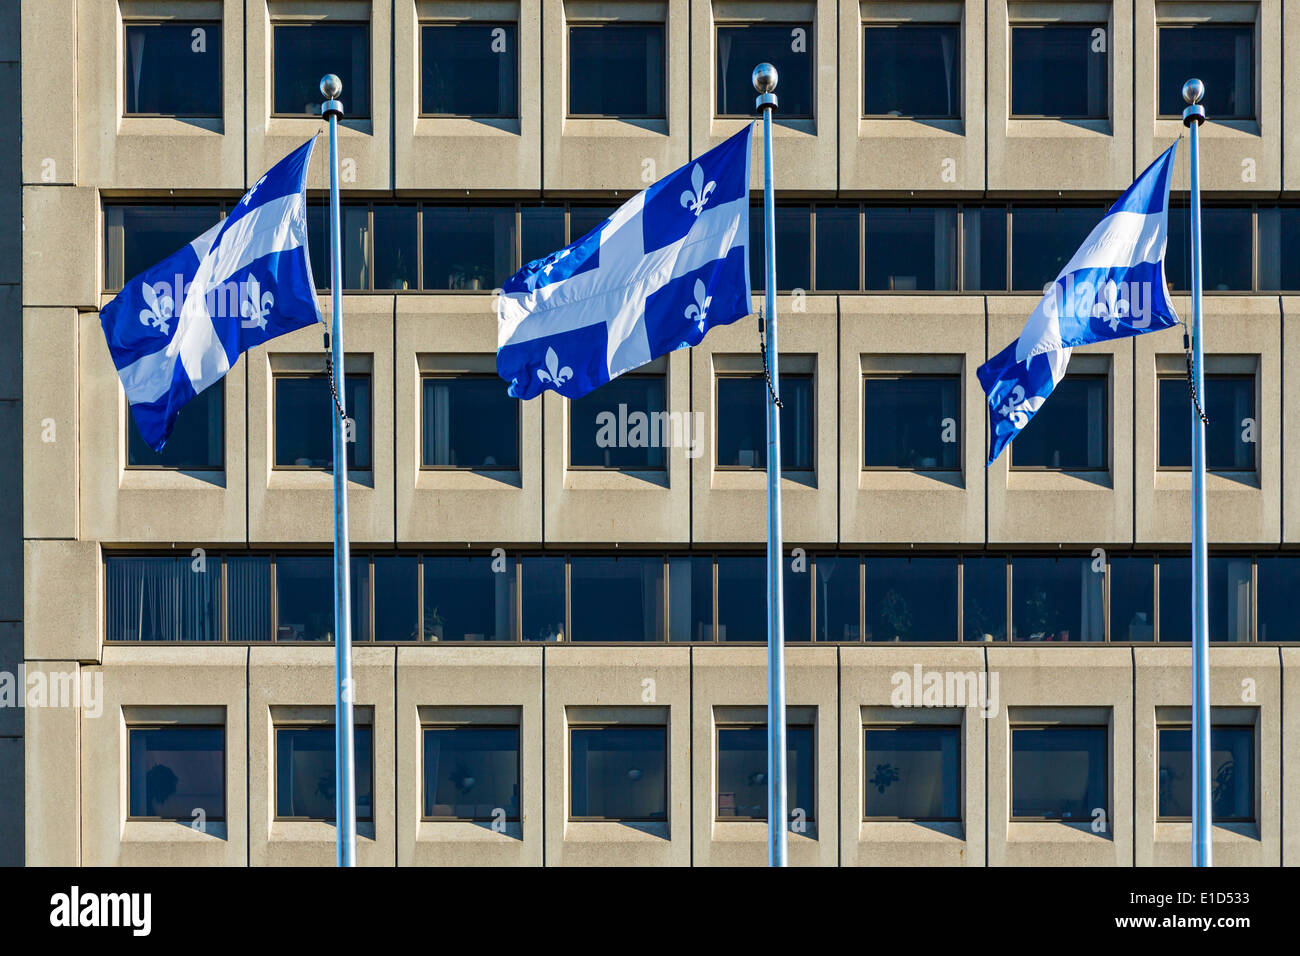 The National flag of Quebec flying in Quebec City, Quebec, Canada. Stock Photo